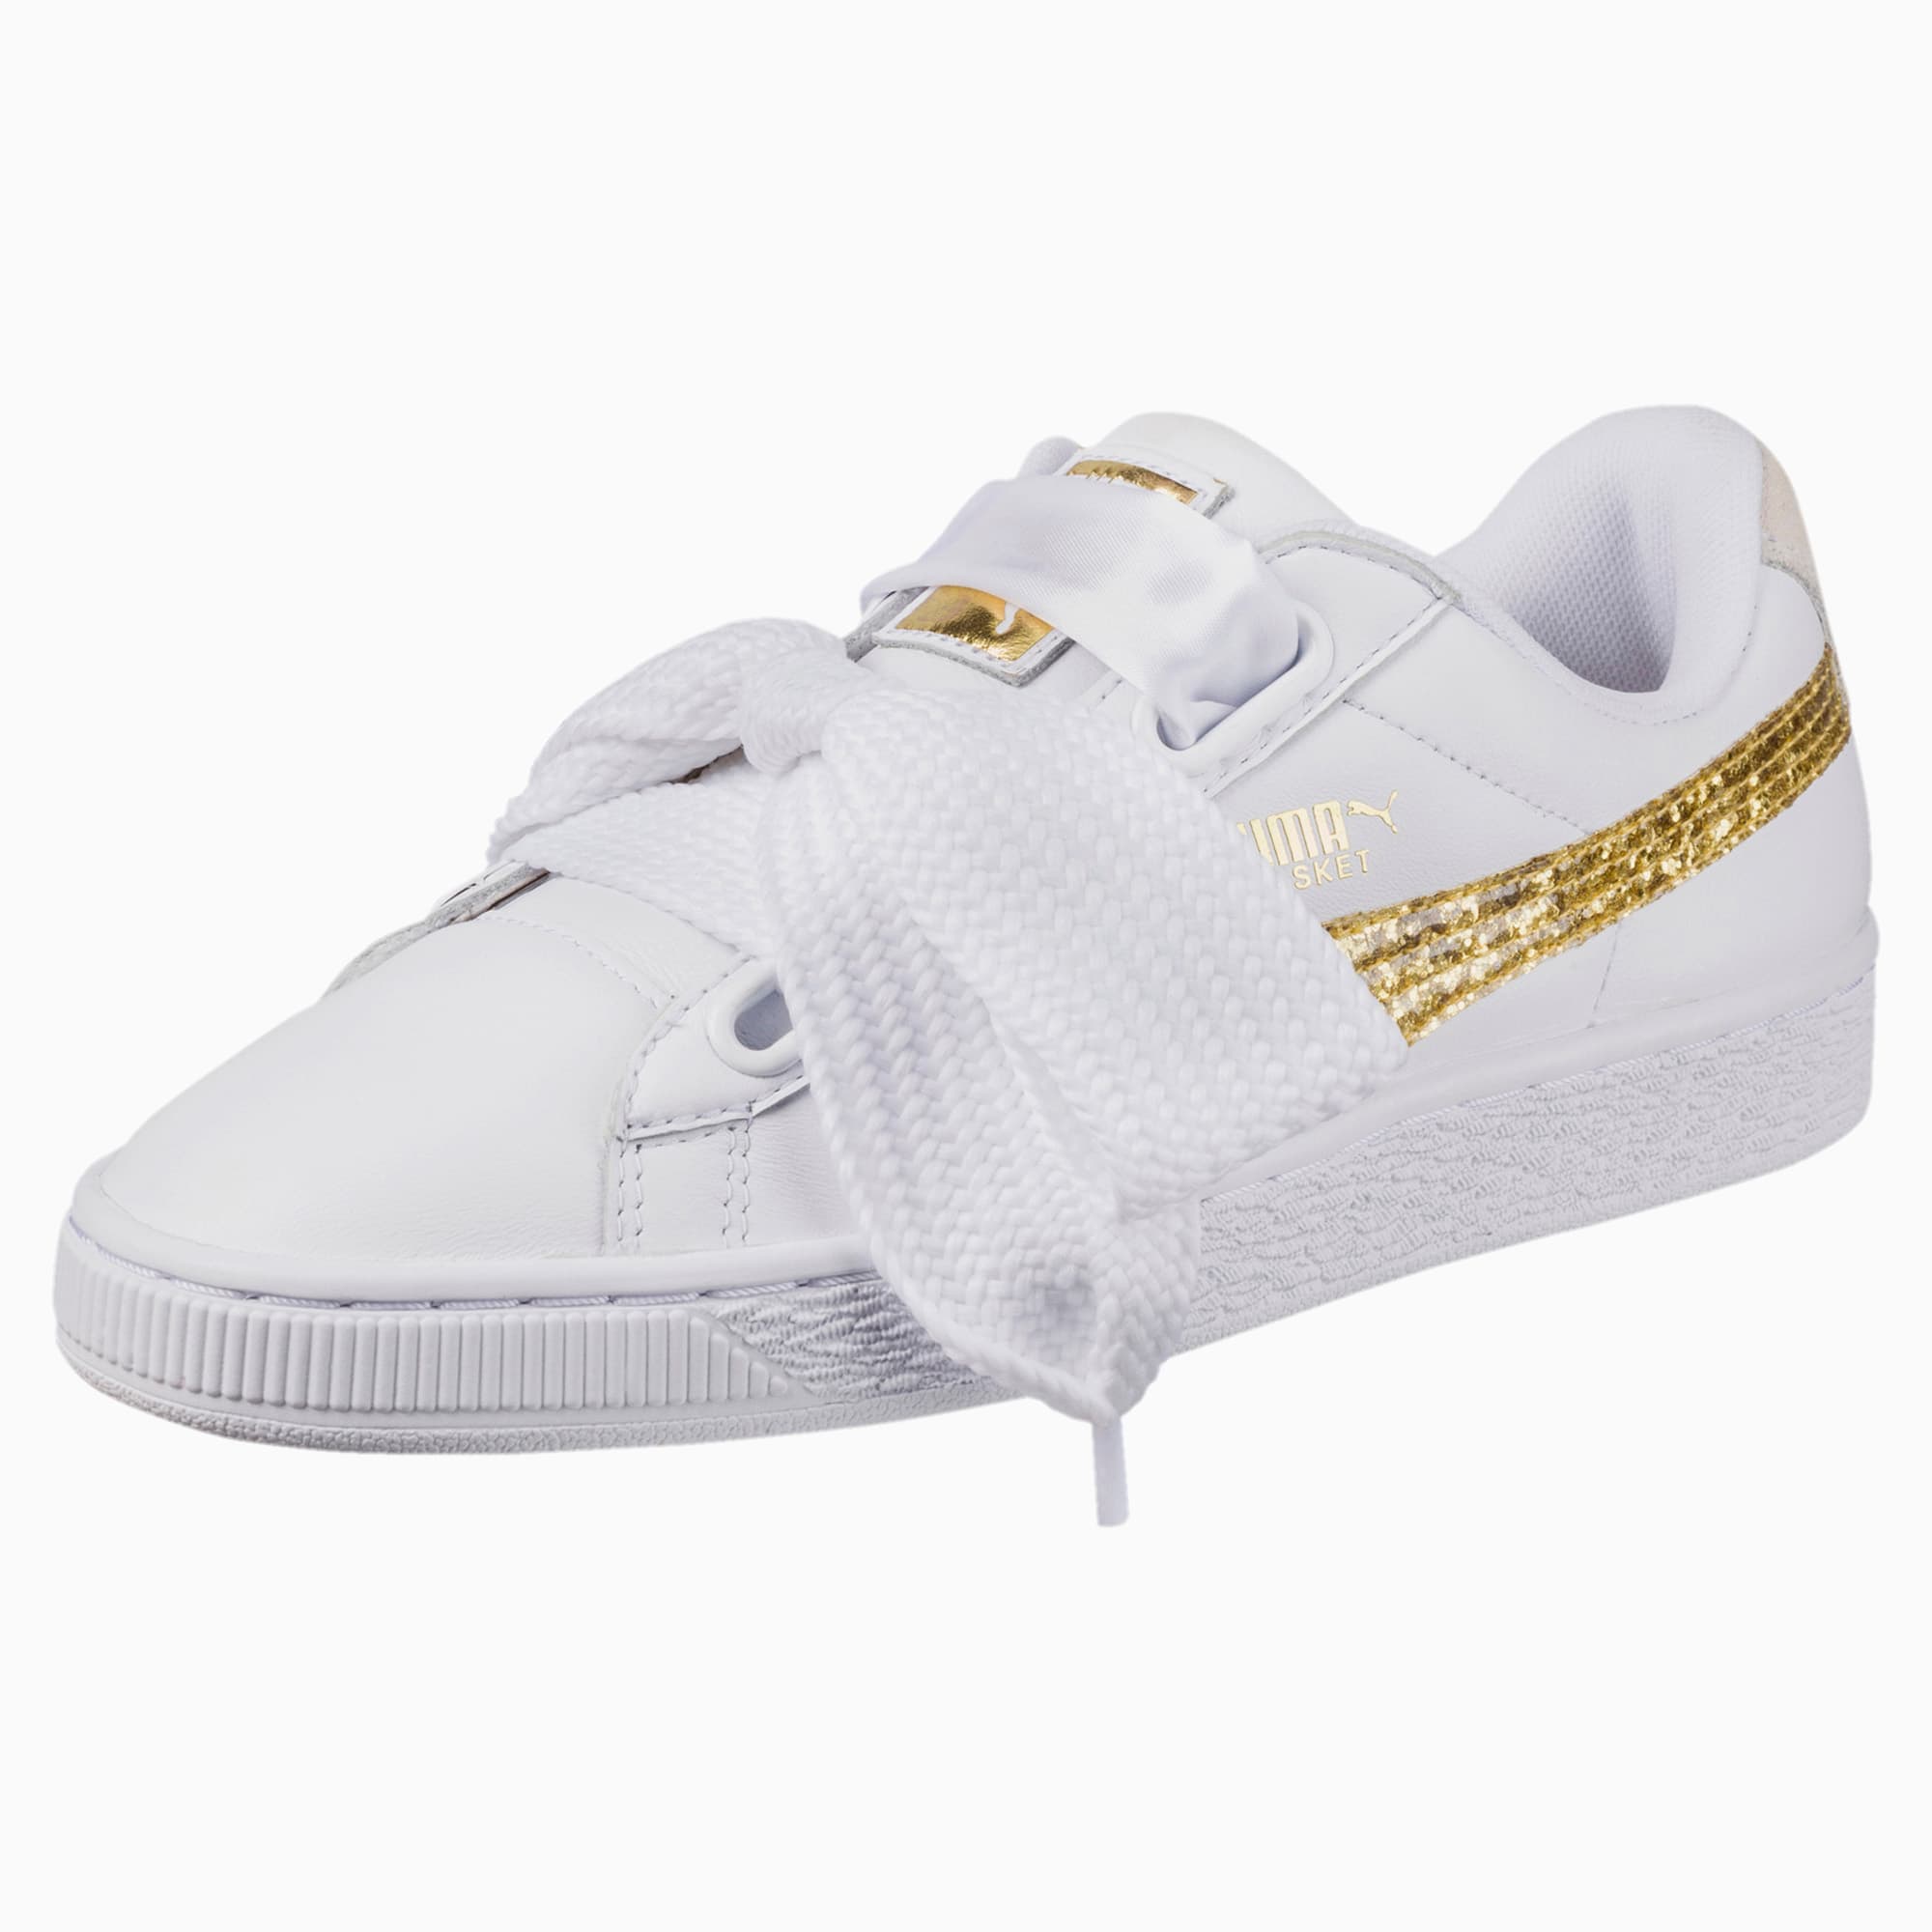 puma white and gold shoes